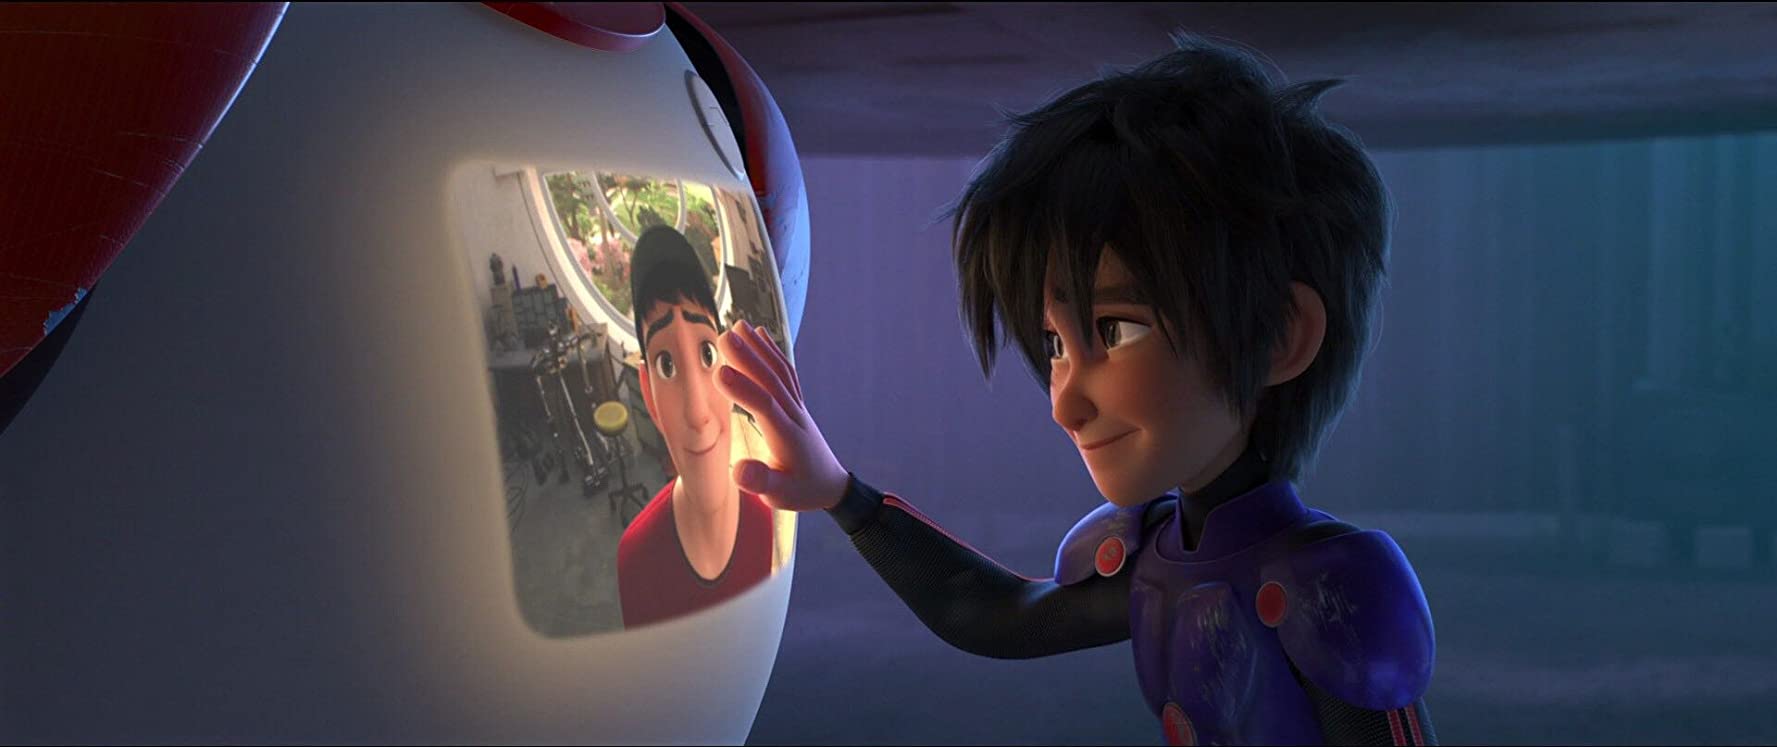 Hiro Hamada gets inspiration from his brother in "Big Hero 6"